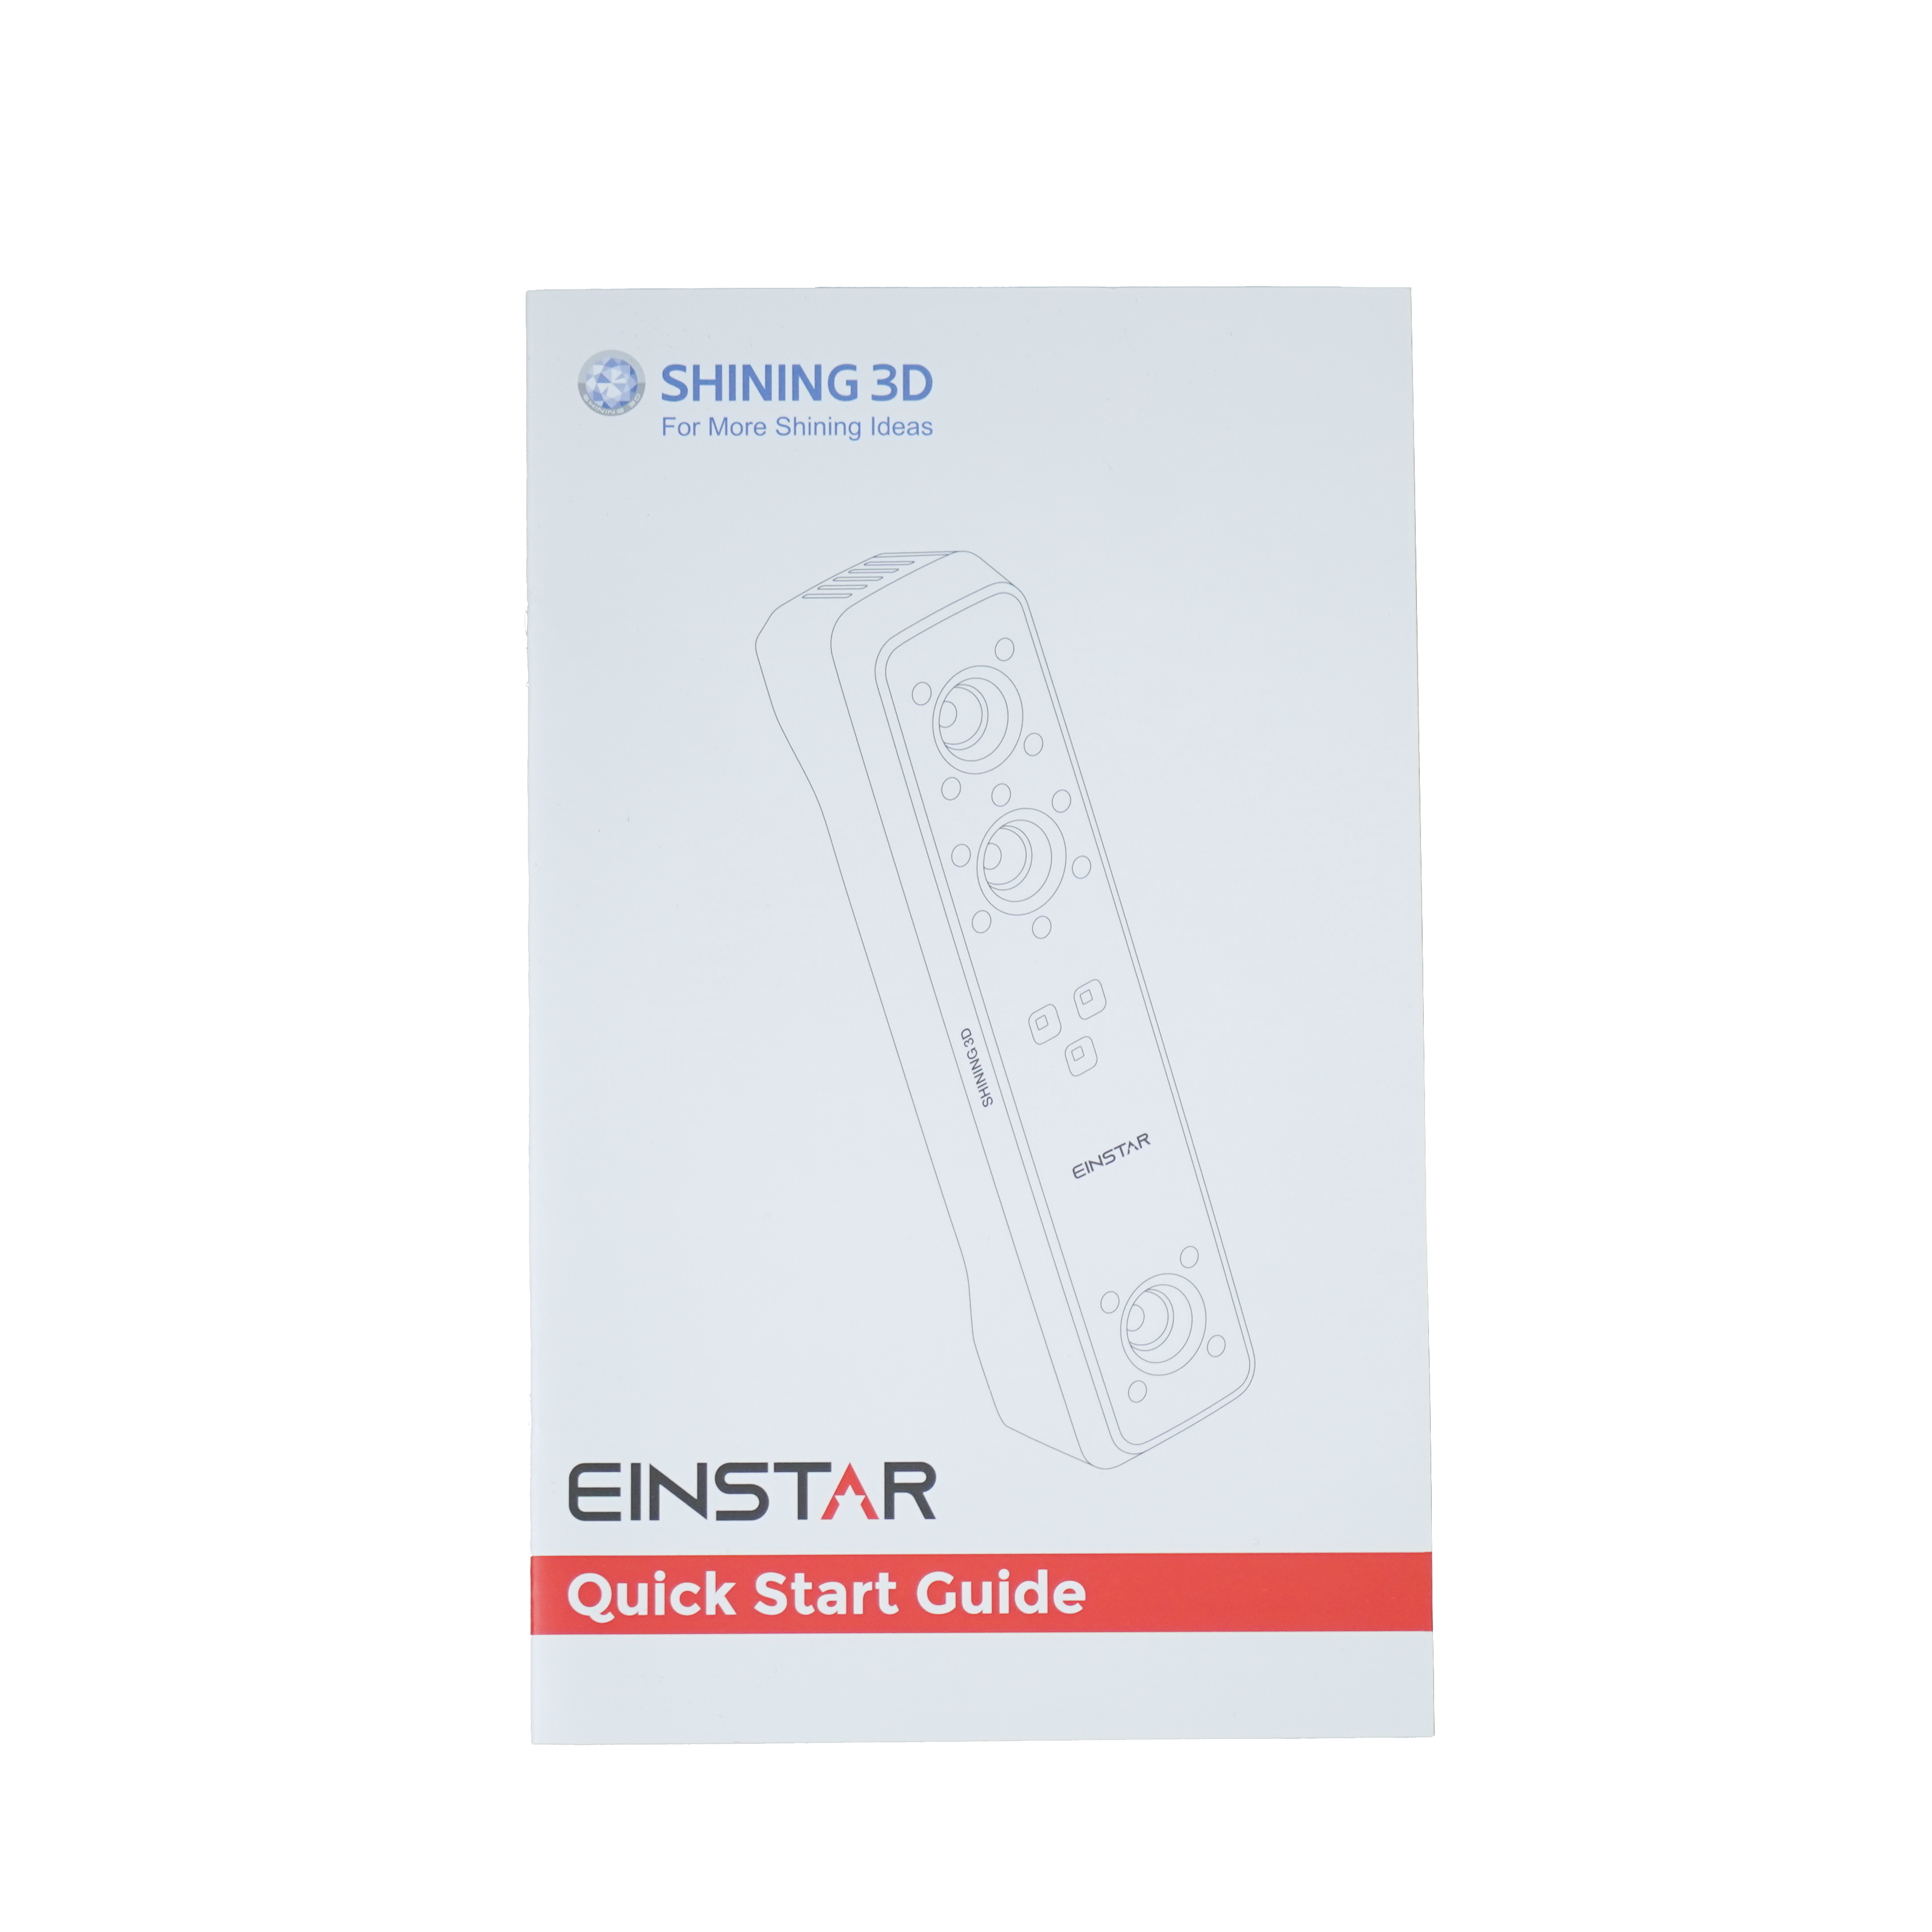 Quick start guide for EINSTAR 3D scanner included in the box.